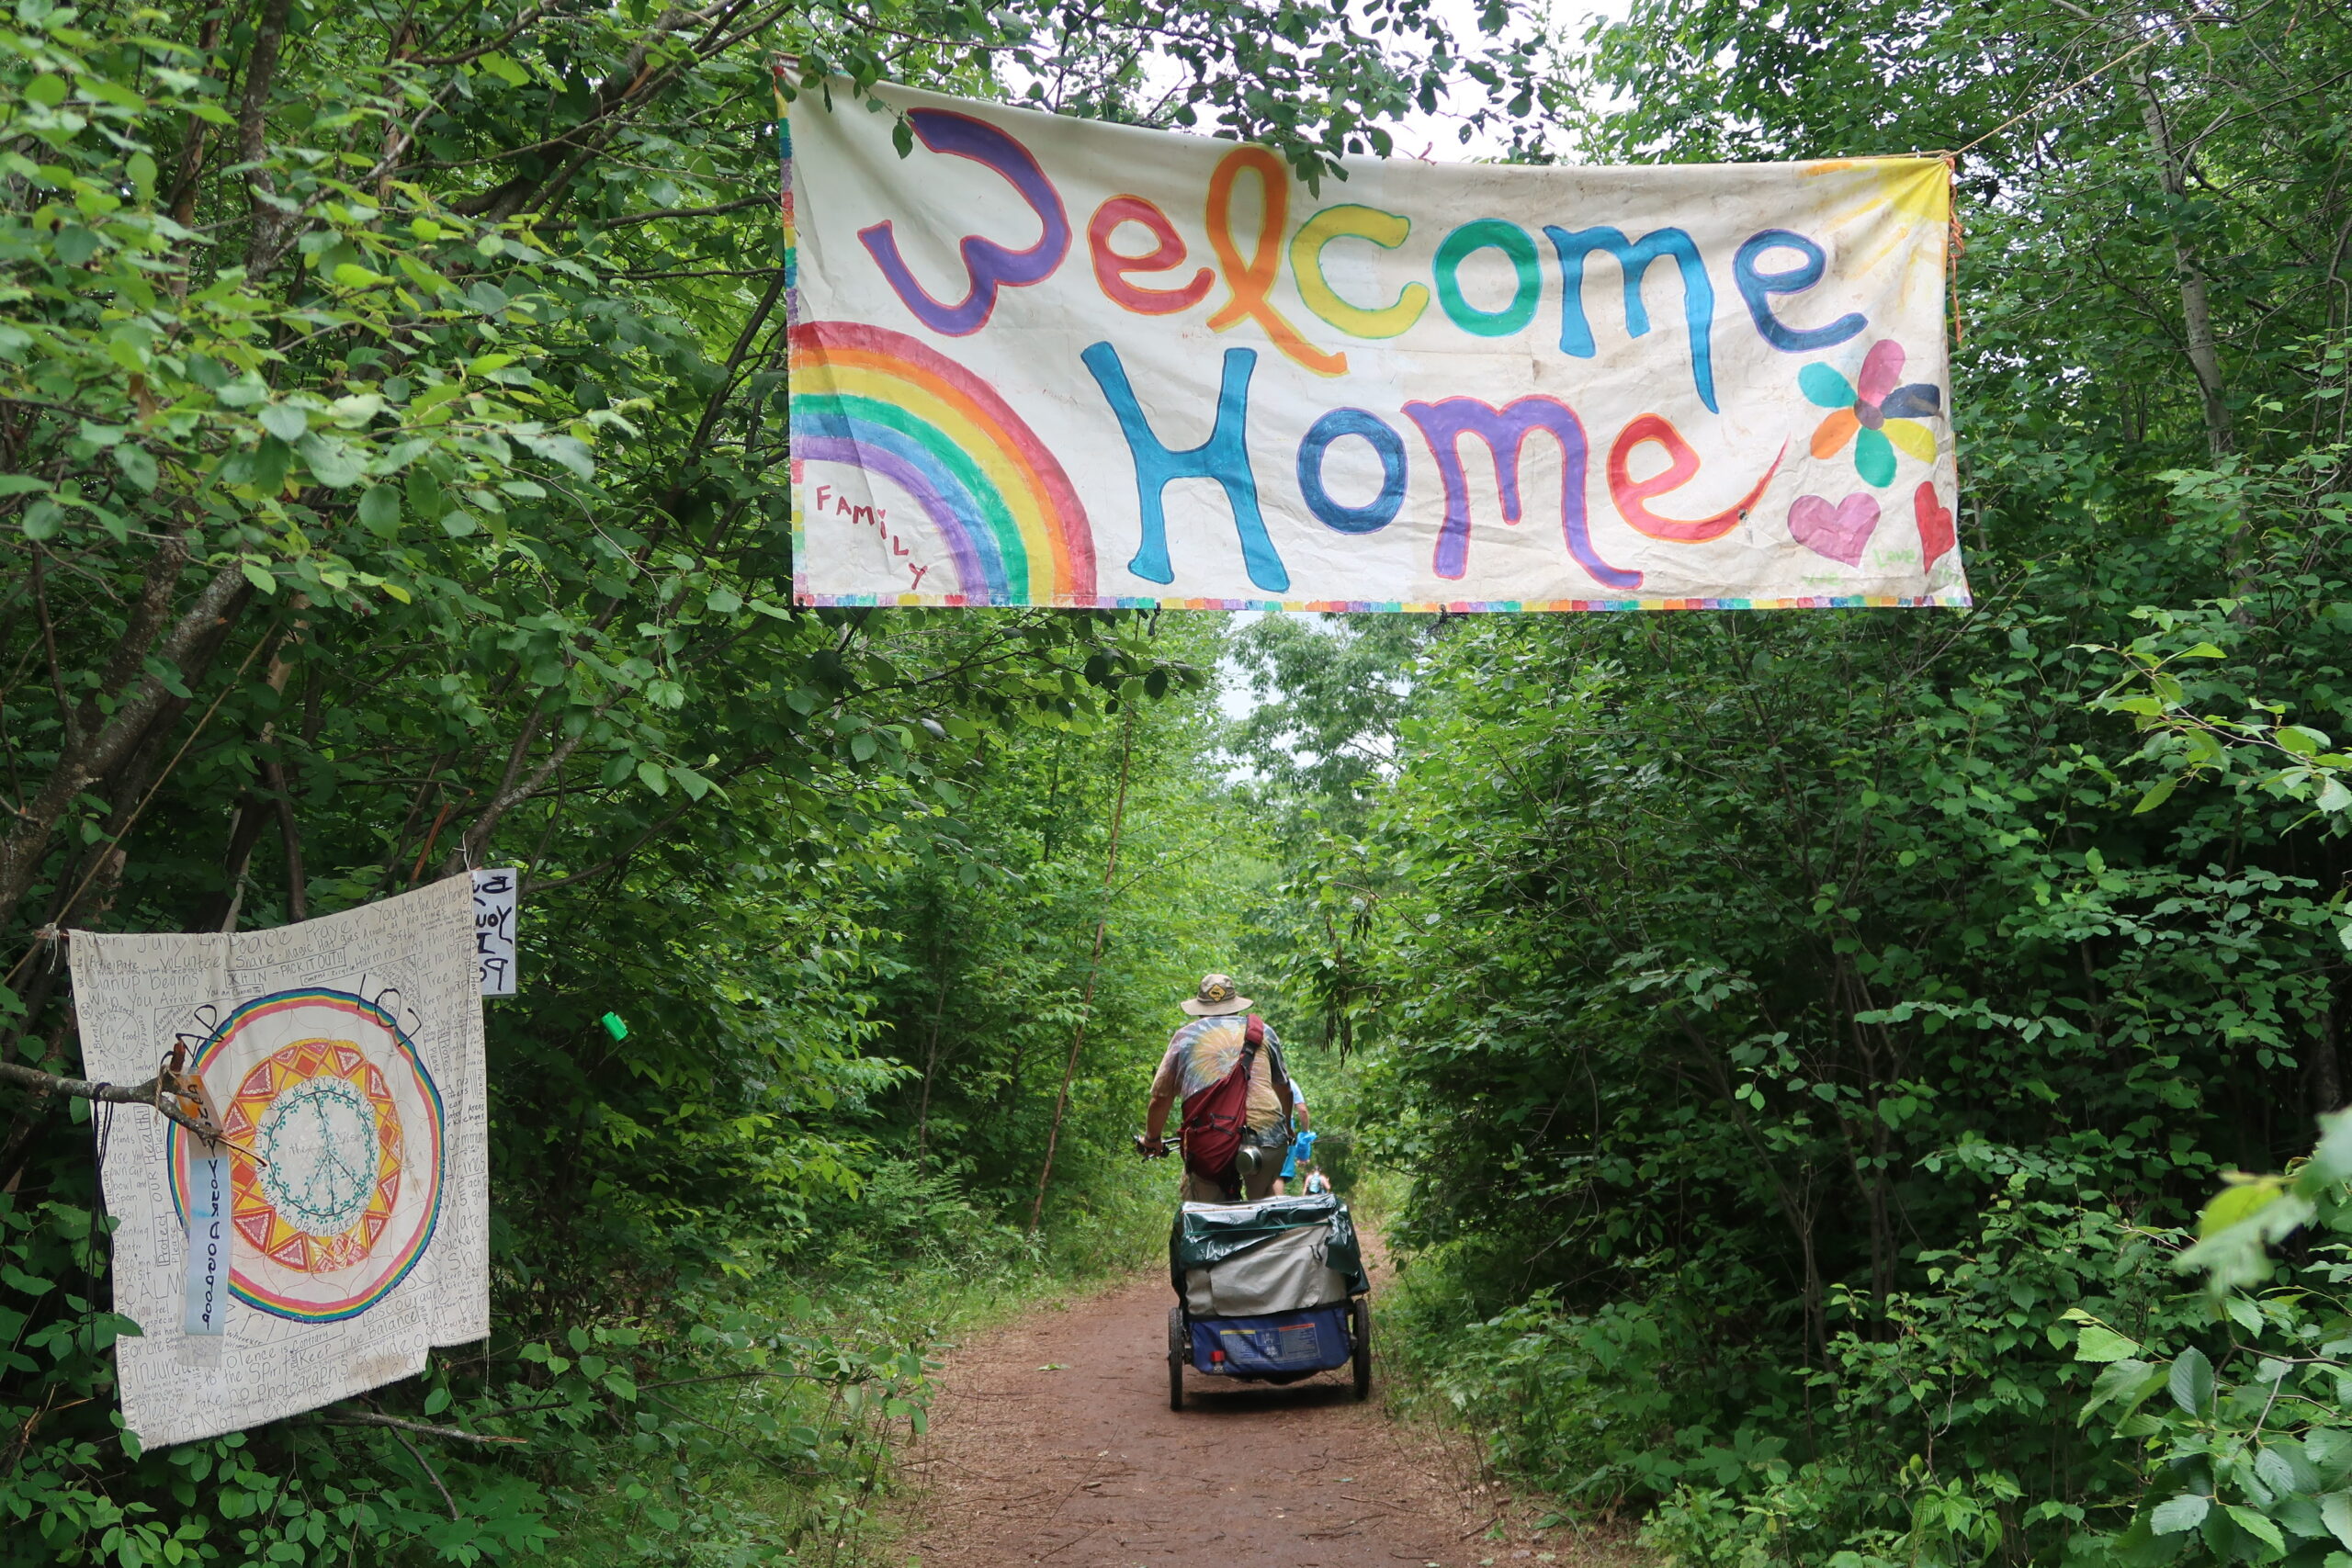 Trail head leading to the Rainbow Family national gathering